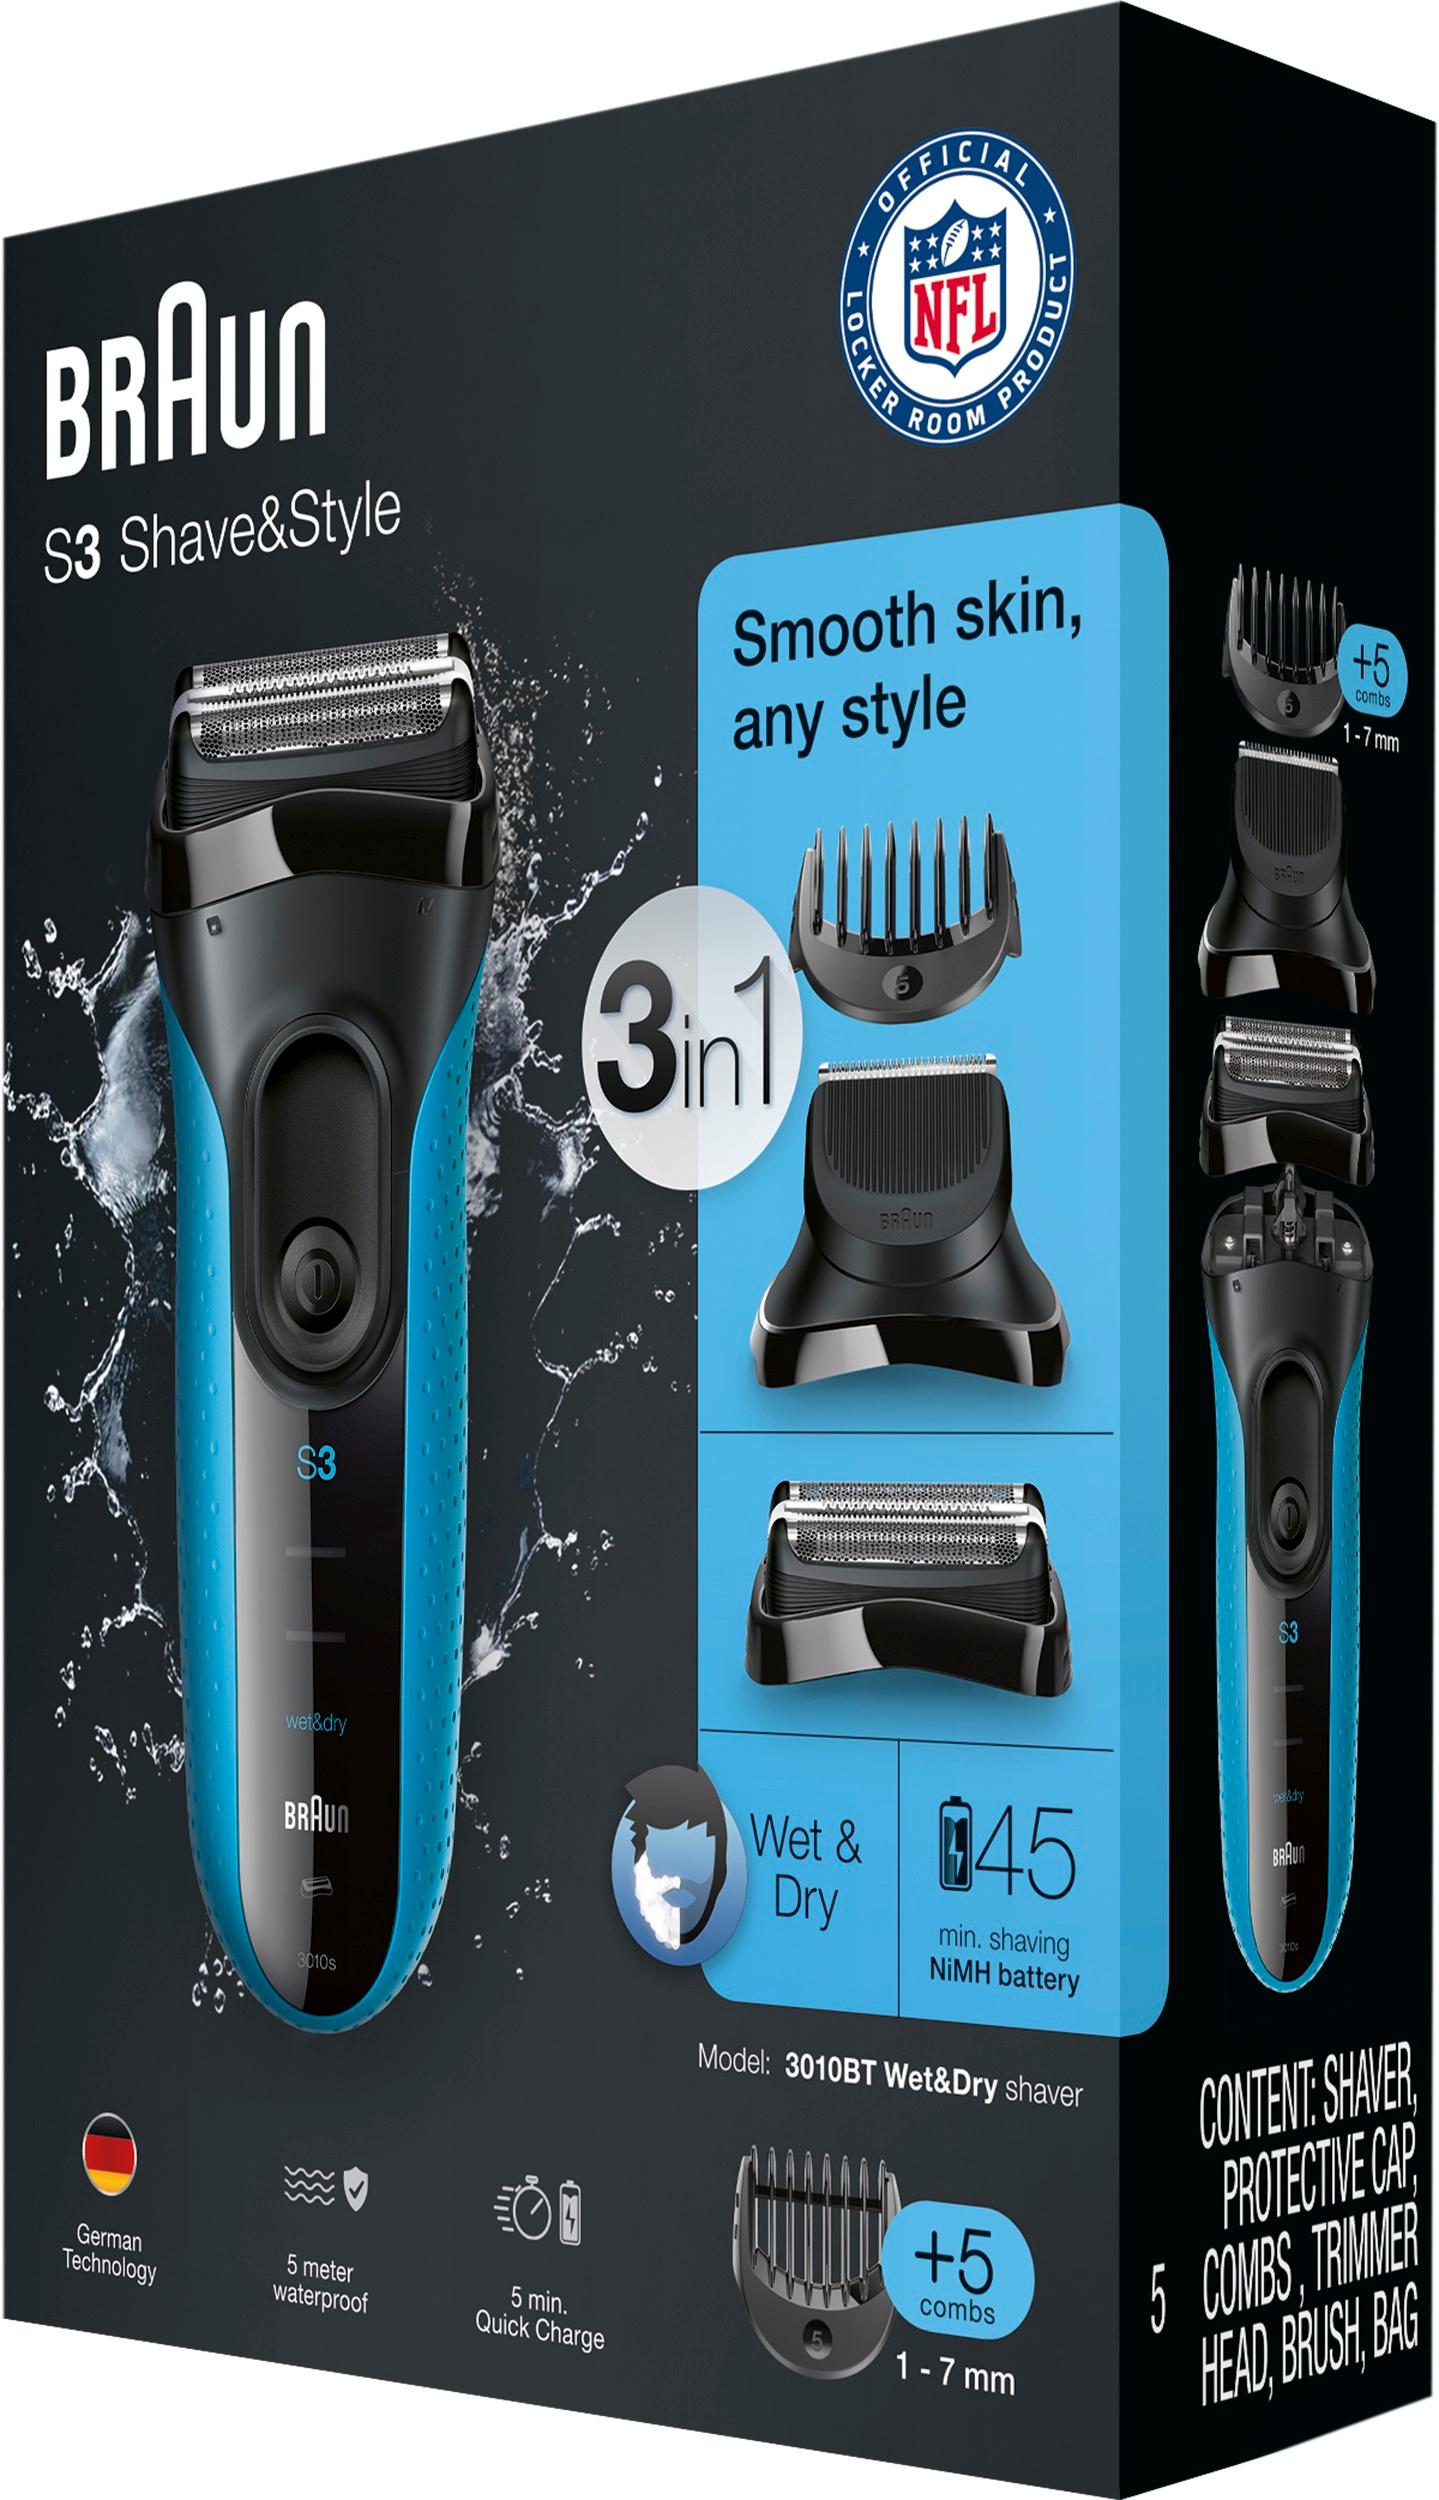 Image result for Braun Series 3 Shave&Style Wet/Dry Electric Shaver (3010BT)